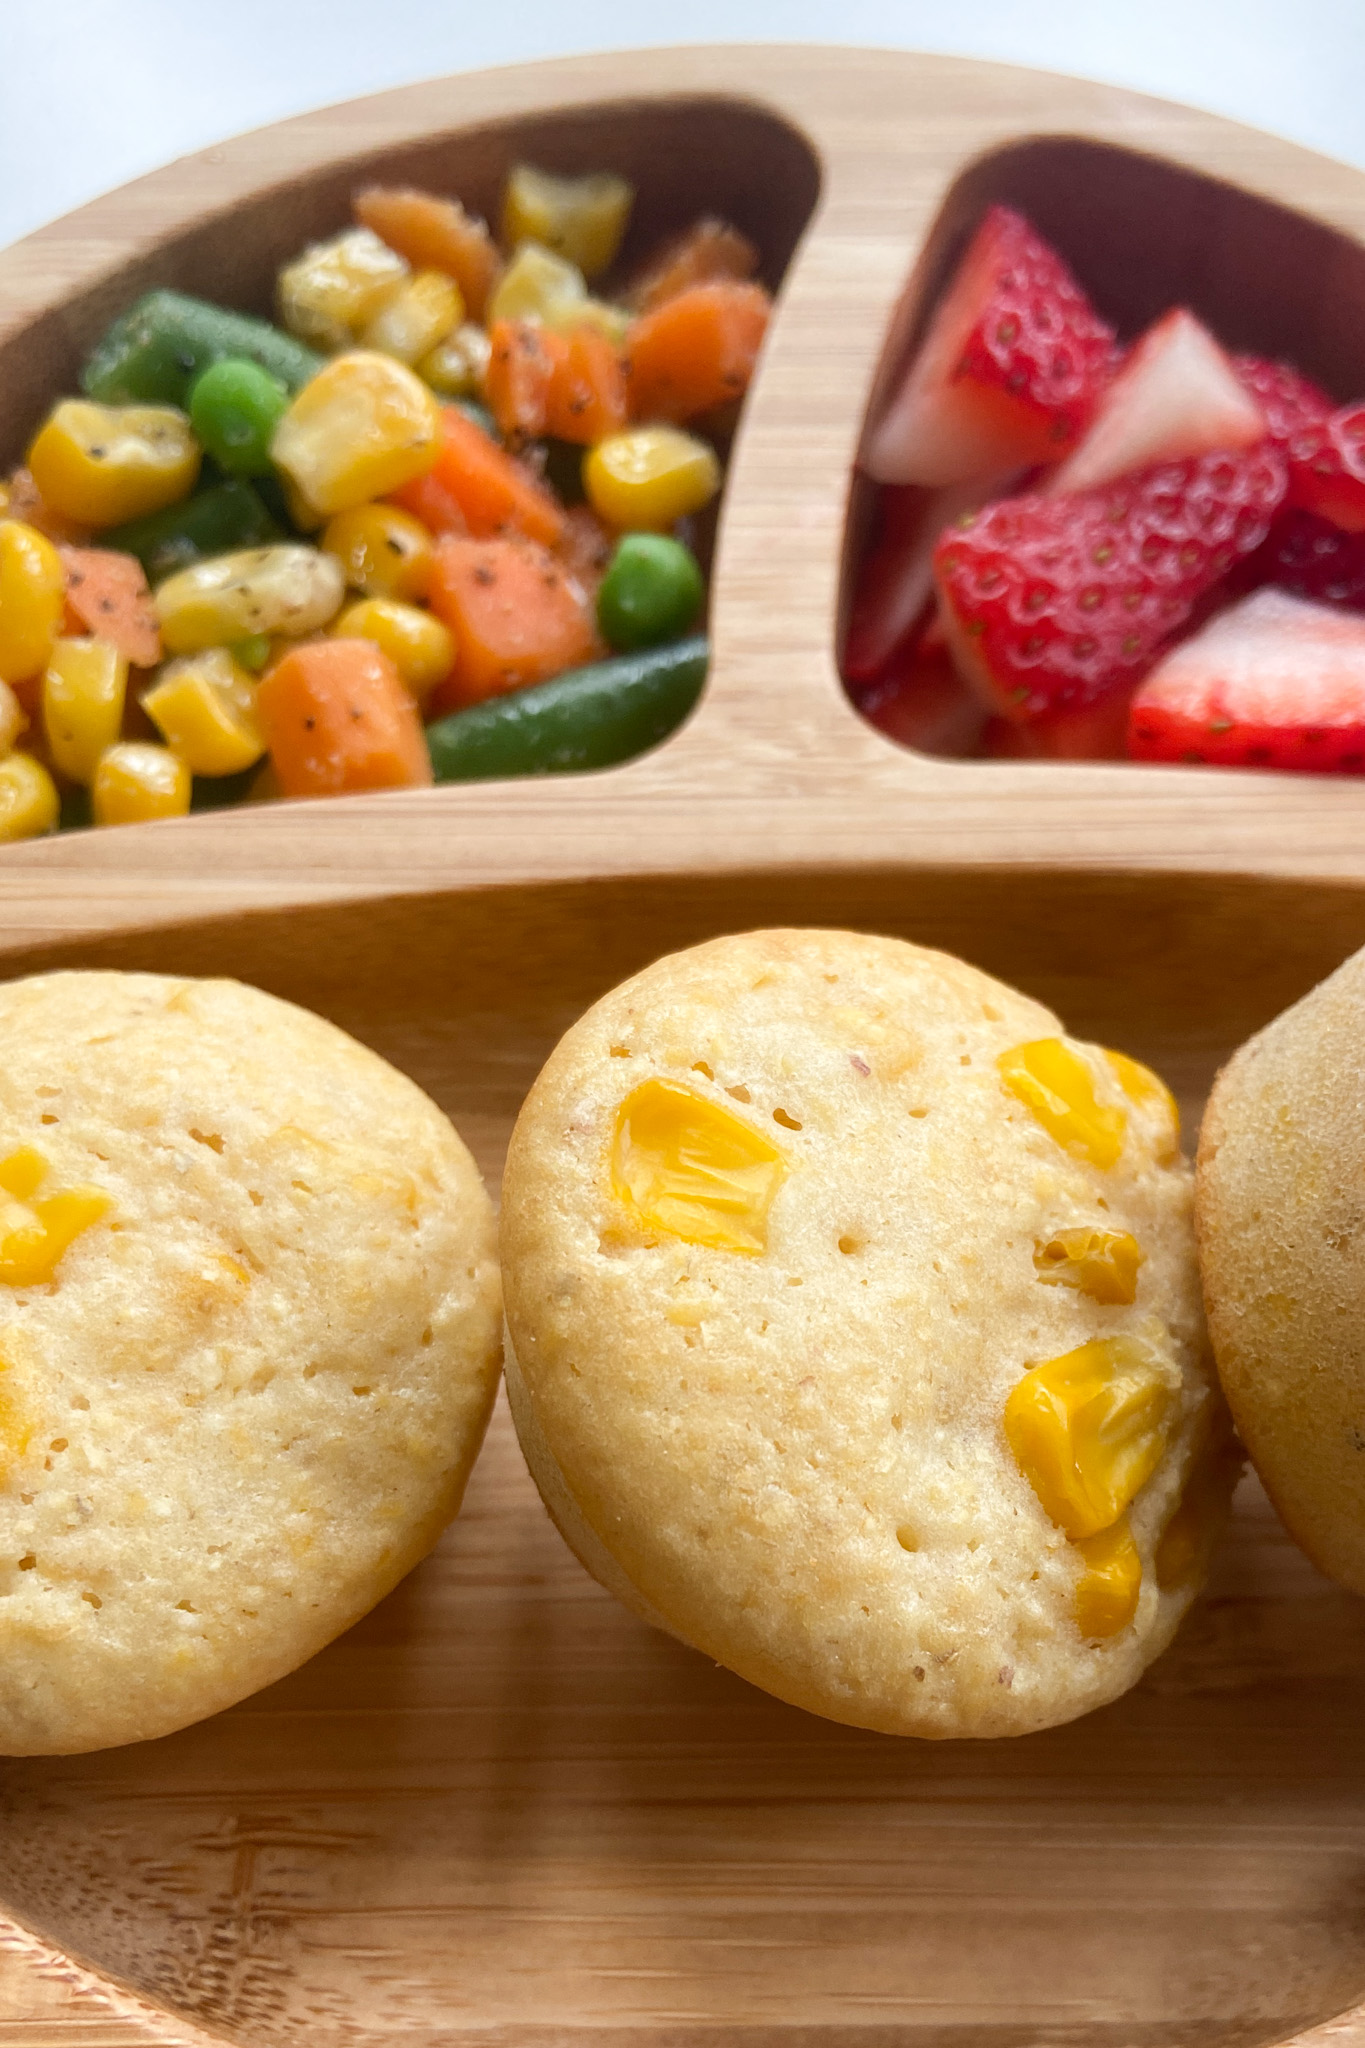 Double corn muffins served with veggies and strawberries